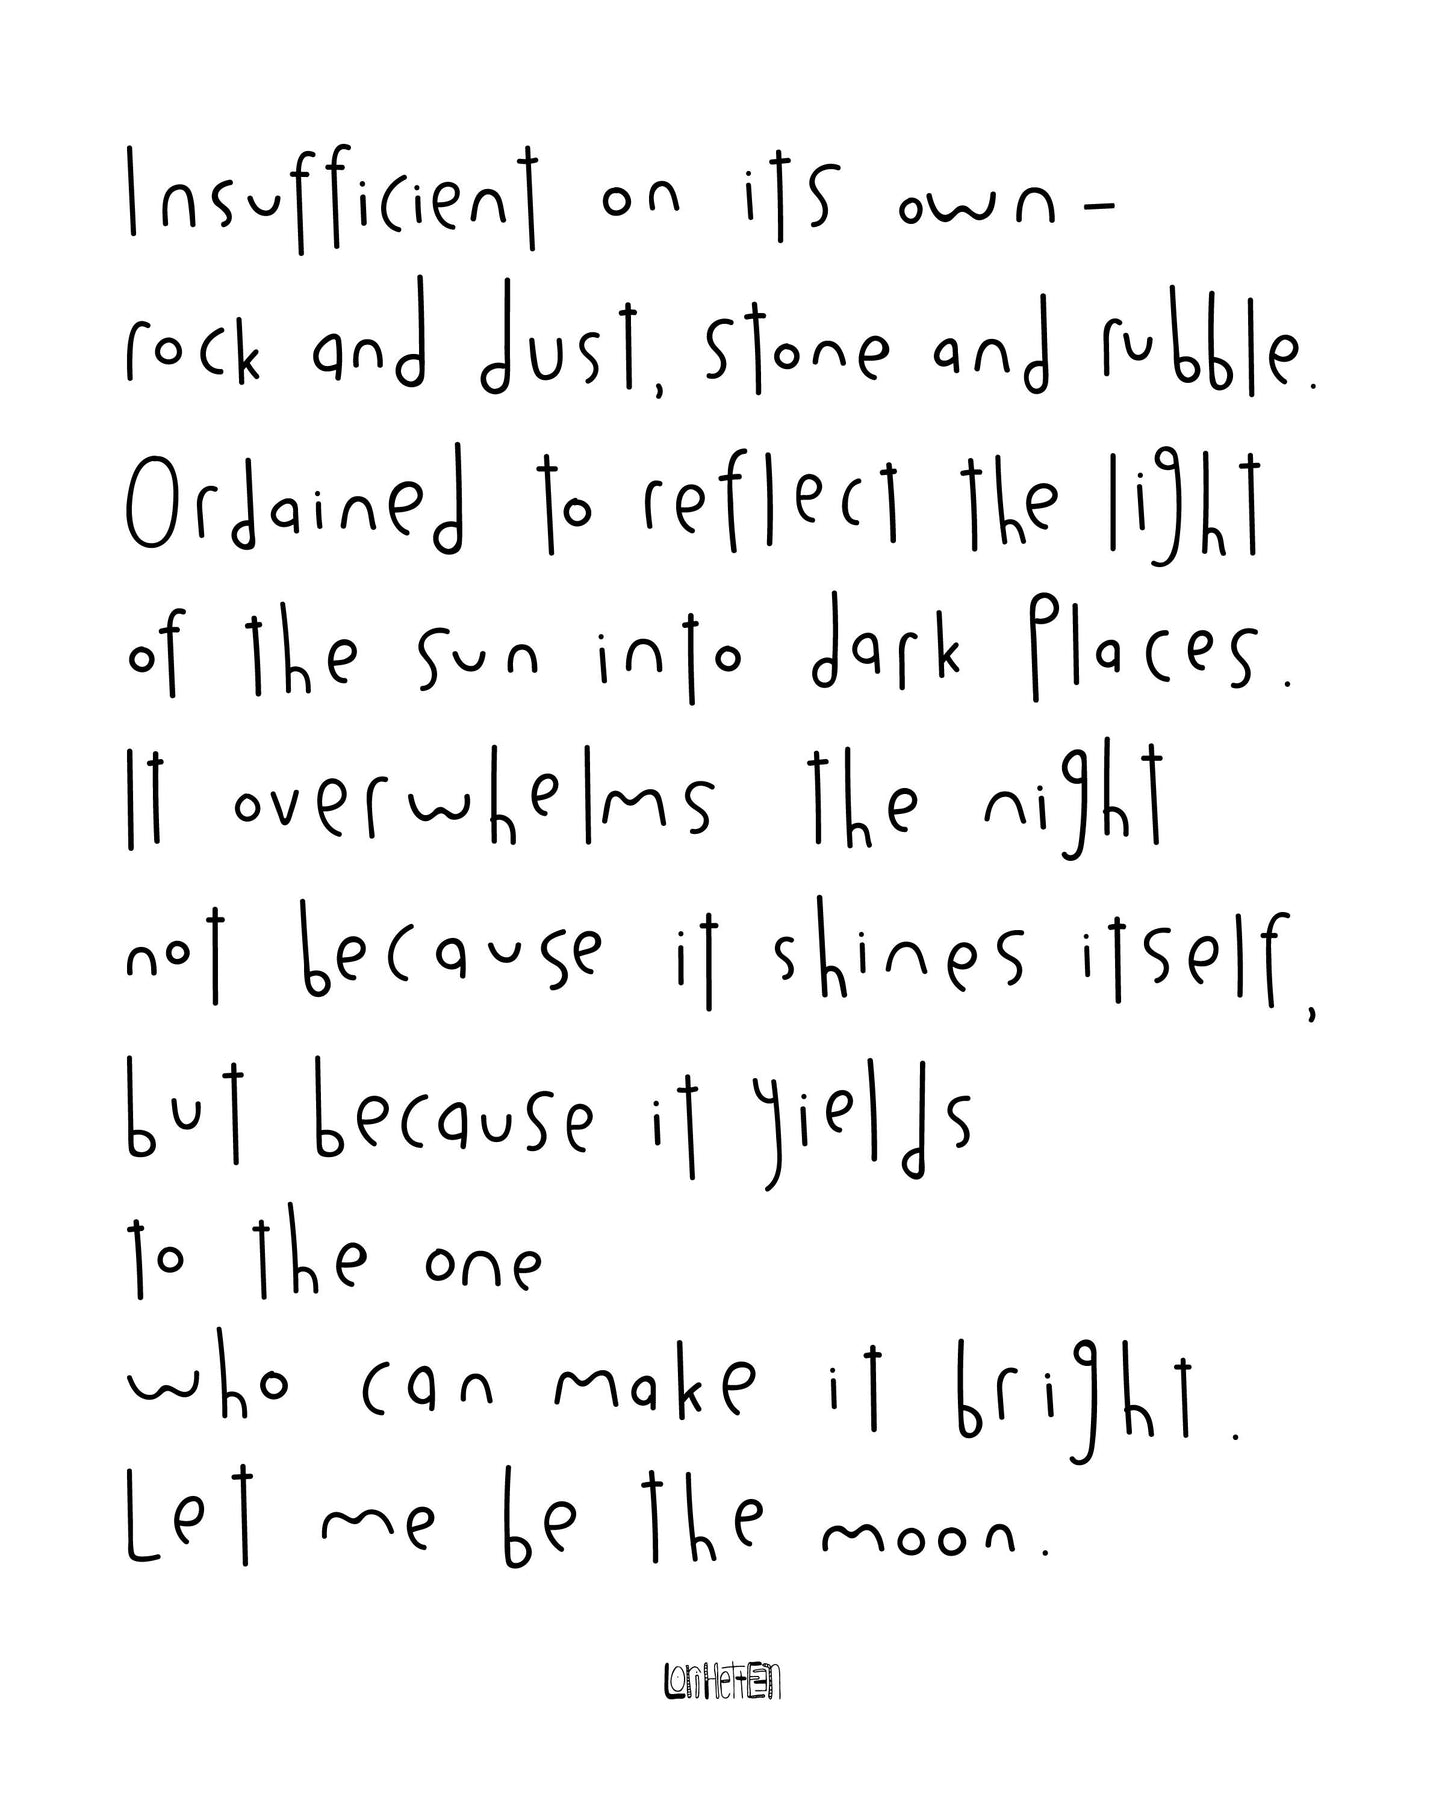 Let Me Be the Moon Artwork